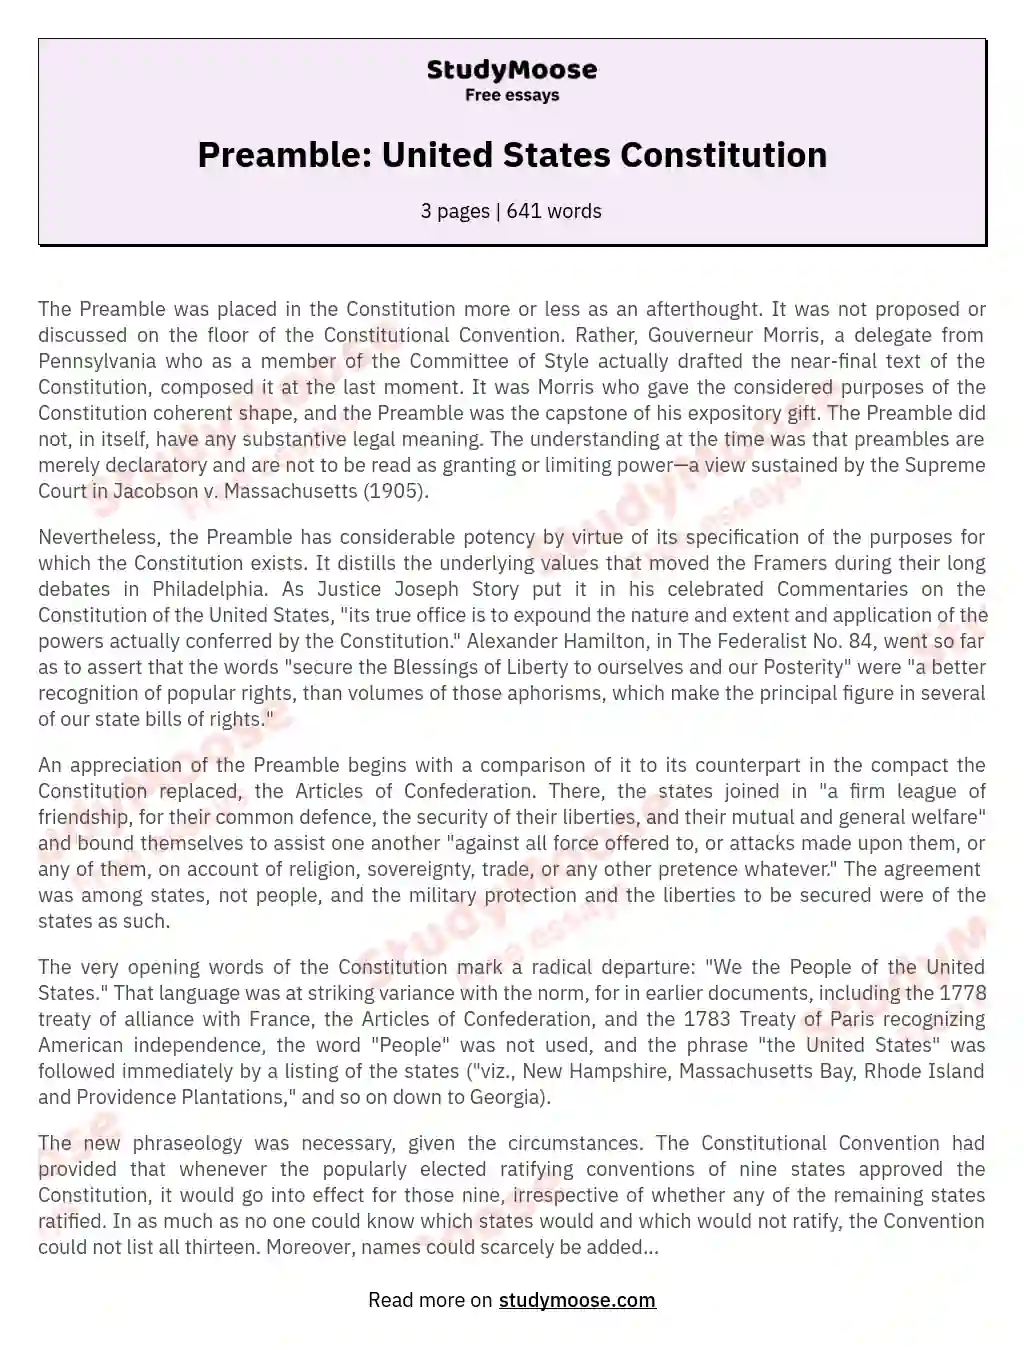 essay on preamble of constitution